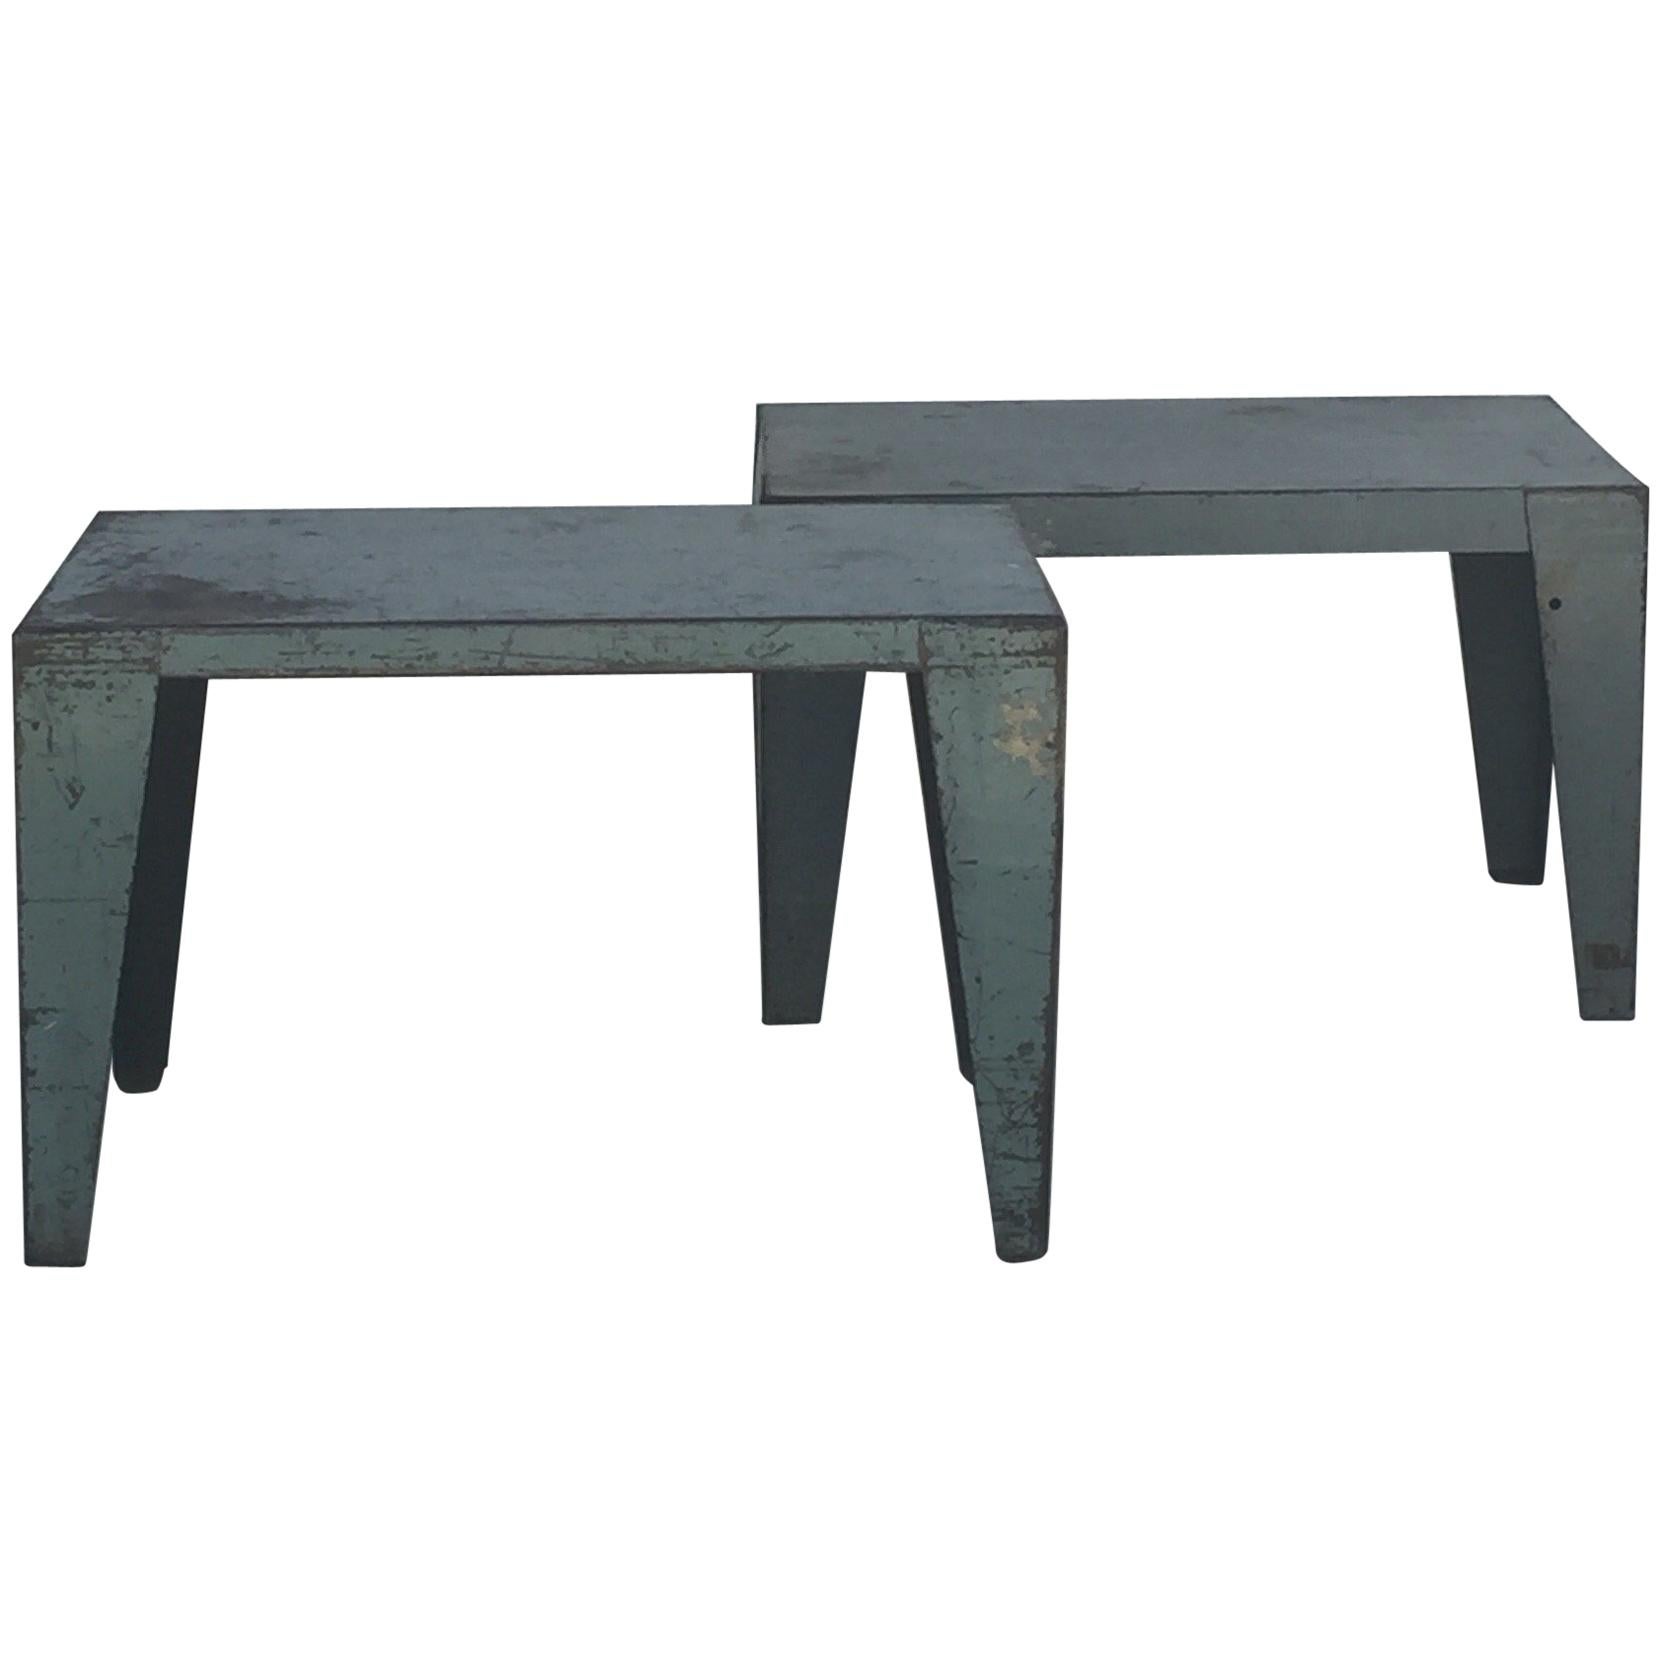 Pair of Weathered Industrial End Tables or Side Tables